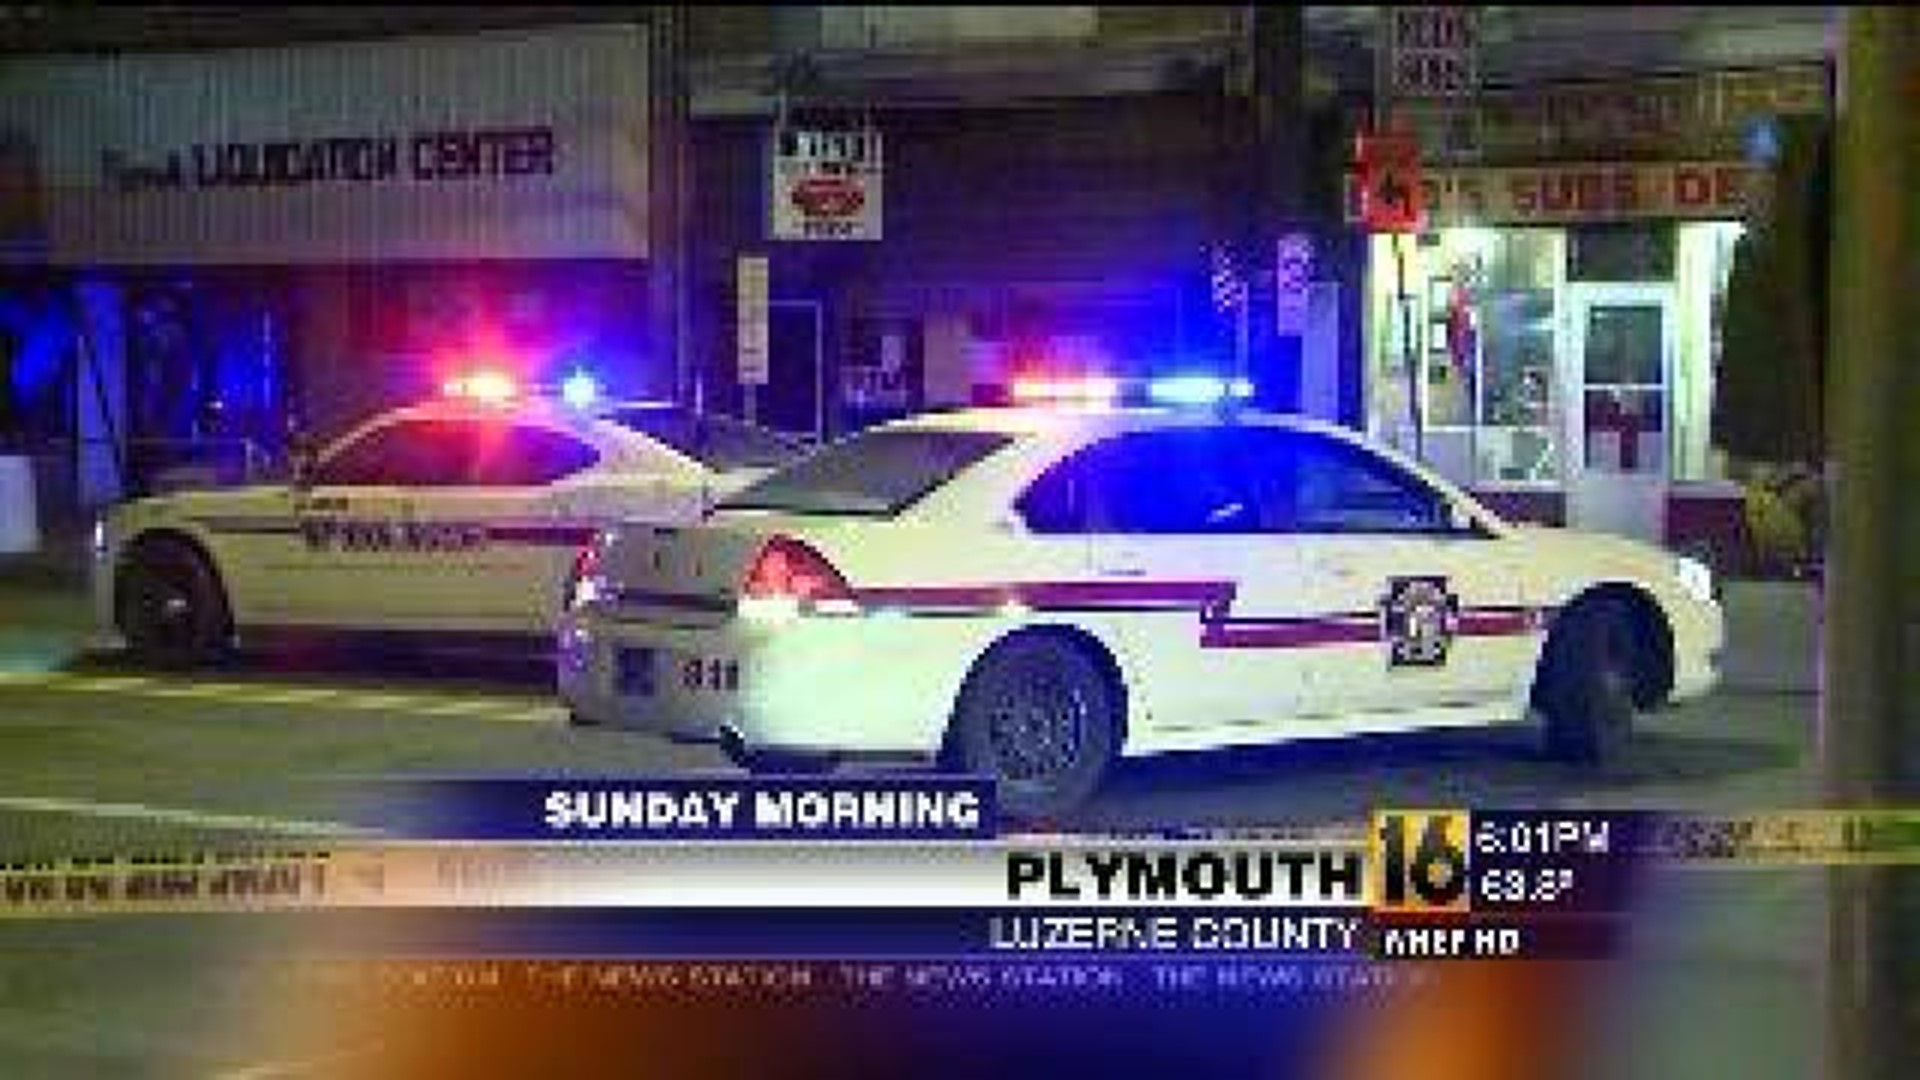 Second Shooter Identified in Plymouth